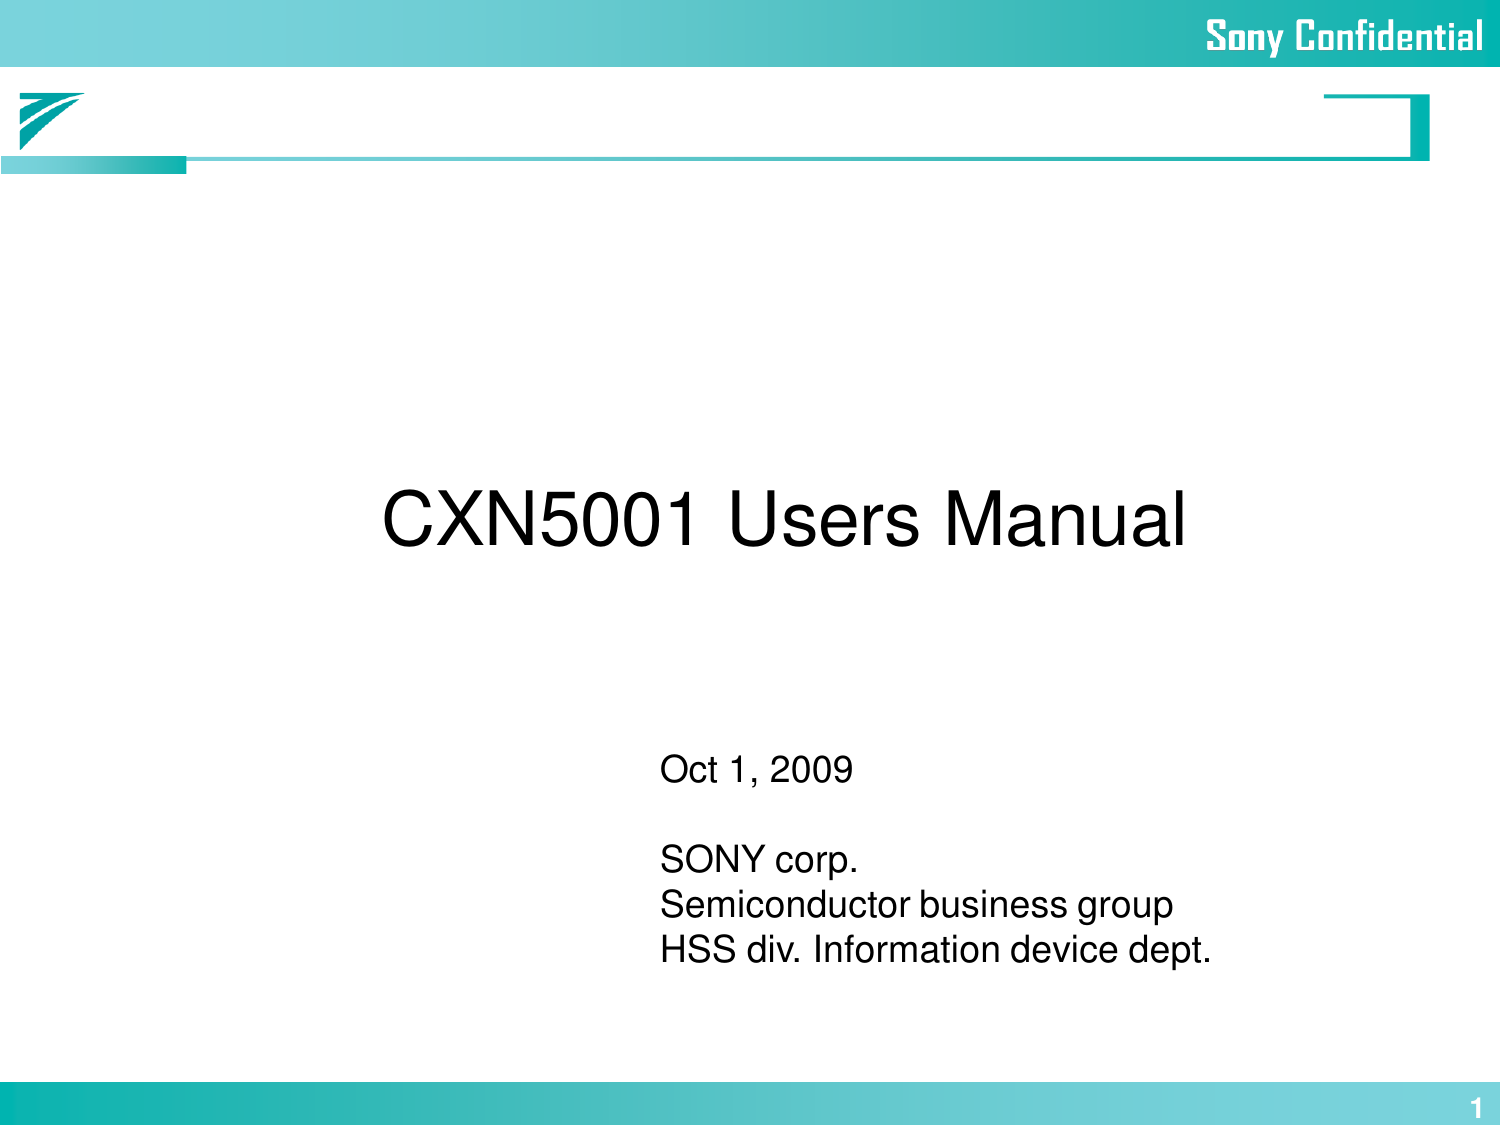 1CXN5001 Users ManualOct 1, 2009SONY corp.Semiconductor business groupHSS div. Information device dept.